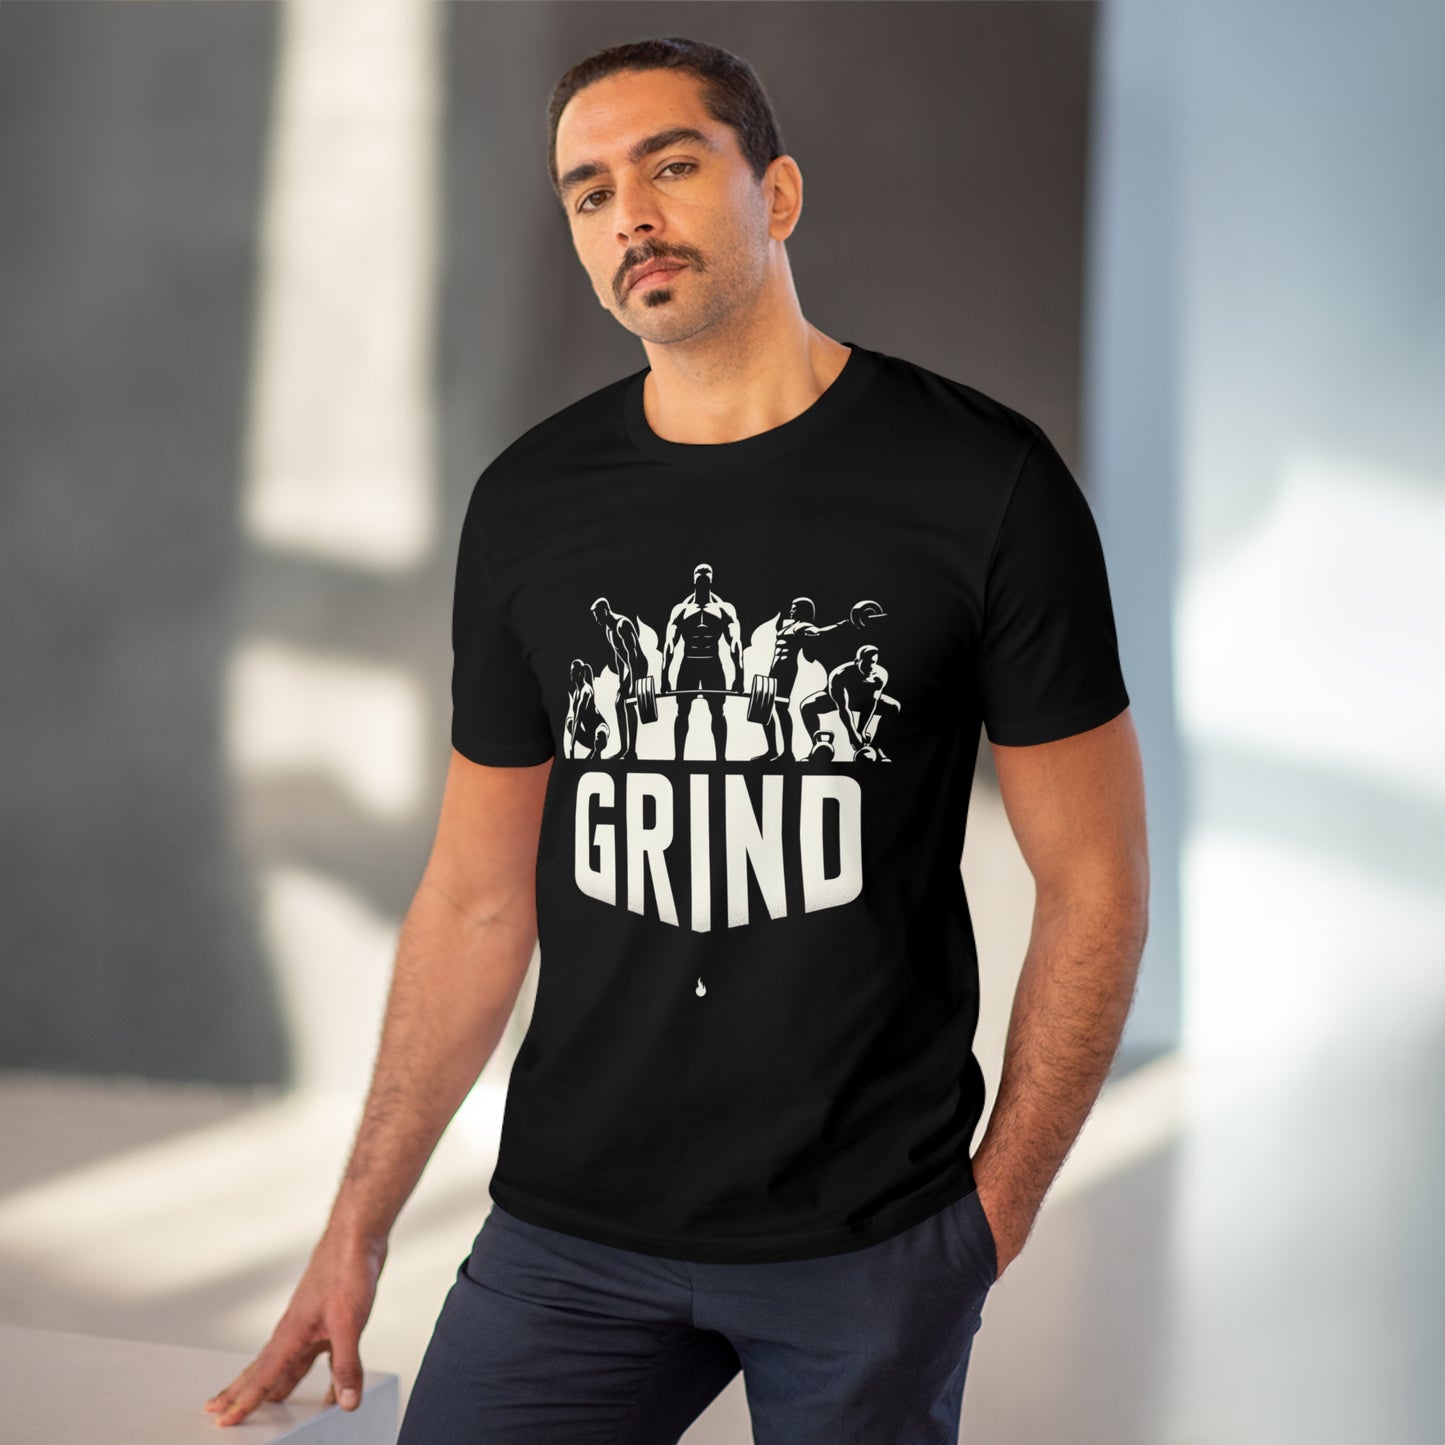 Daily Grind Champion Tee "GRIND" T-shirt - Unisex